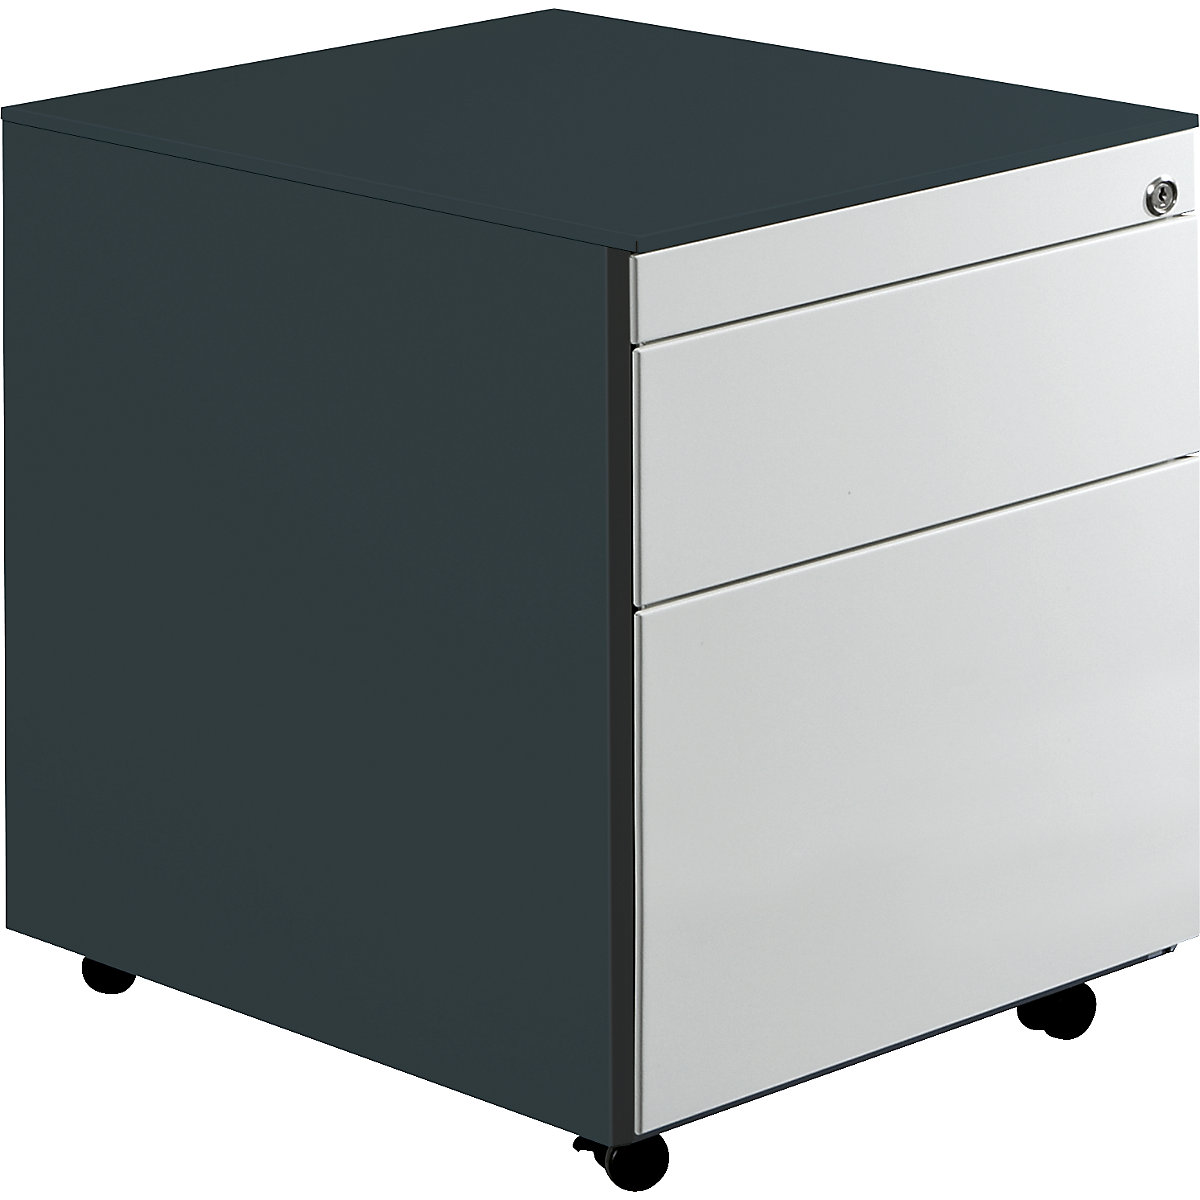 Drawer pedestal with castors – mauser, HxD 570 x 600 mm, 1 drawer, 1 suspension file drawer, charcoal / light grey / charcoal-3